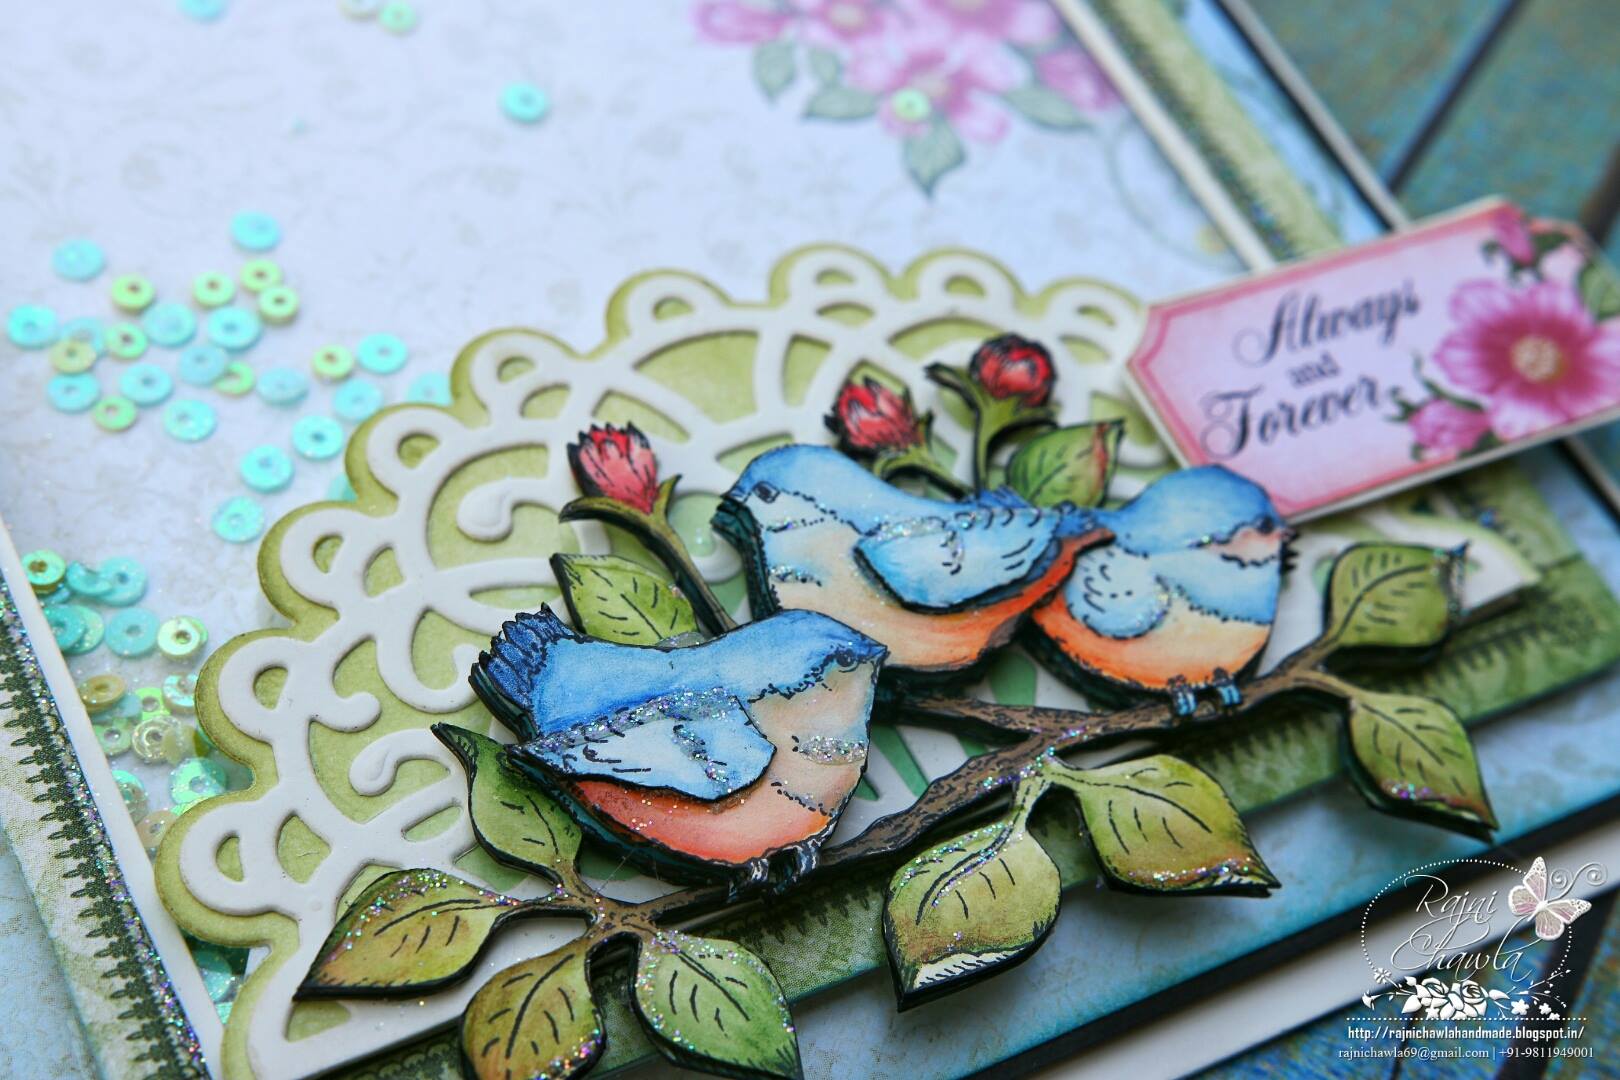 Shik Shik Shik : Shaker Card with Birds and Blooms Collection